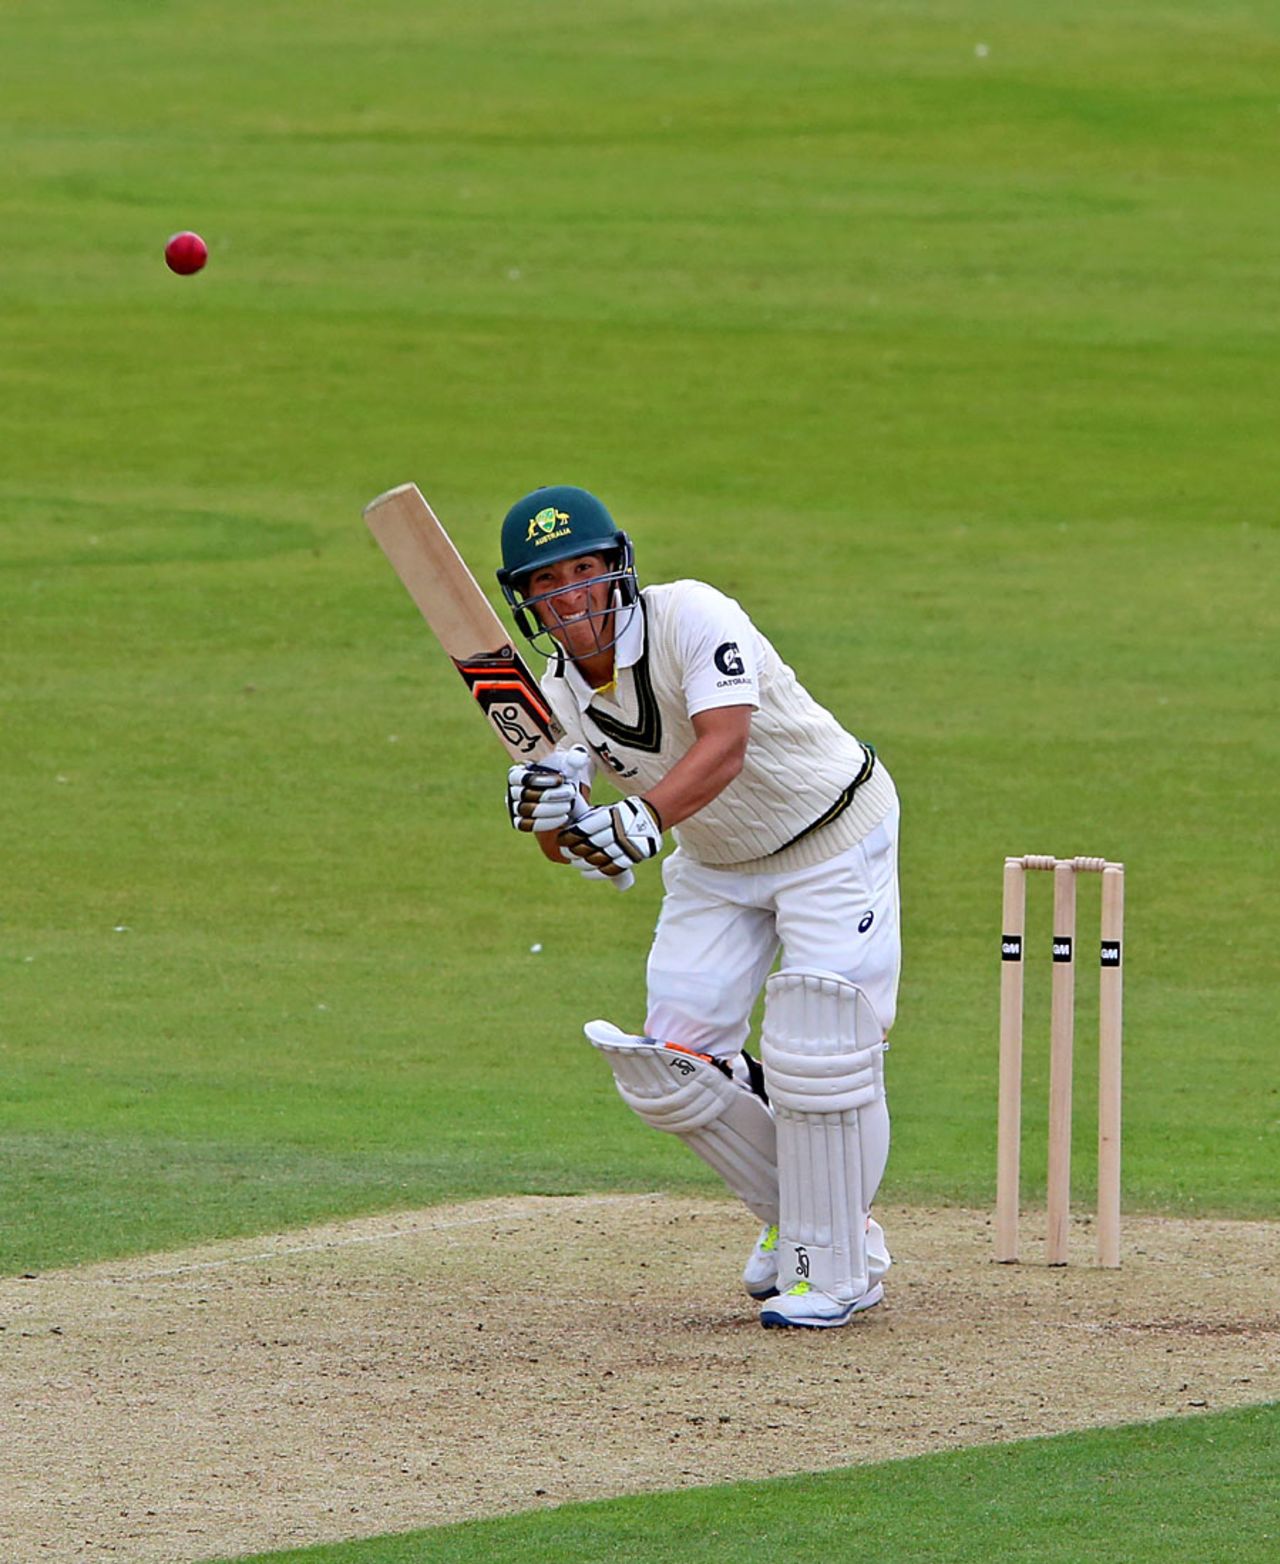 Jordan Gauci made 111 before chipping at catch, England U-19s v Australia U-19s, Only Test, Chester-le-Street, 1st day, August 4, 2015